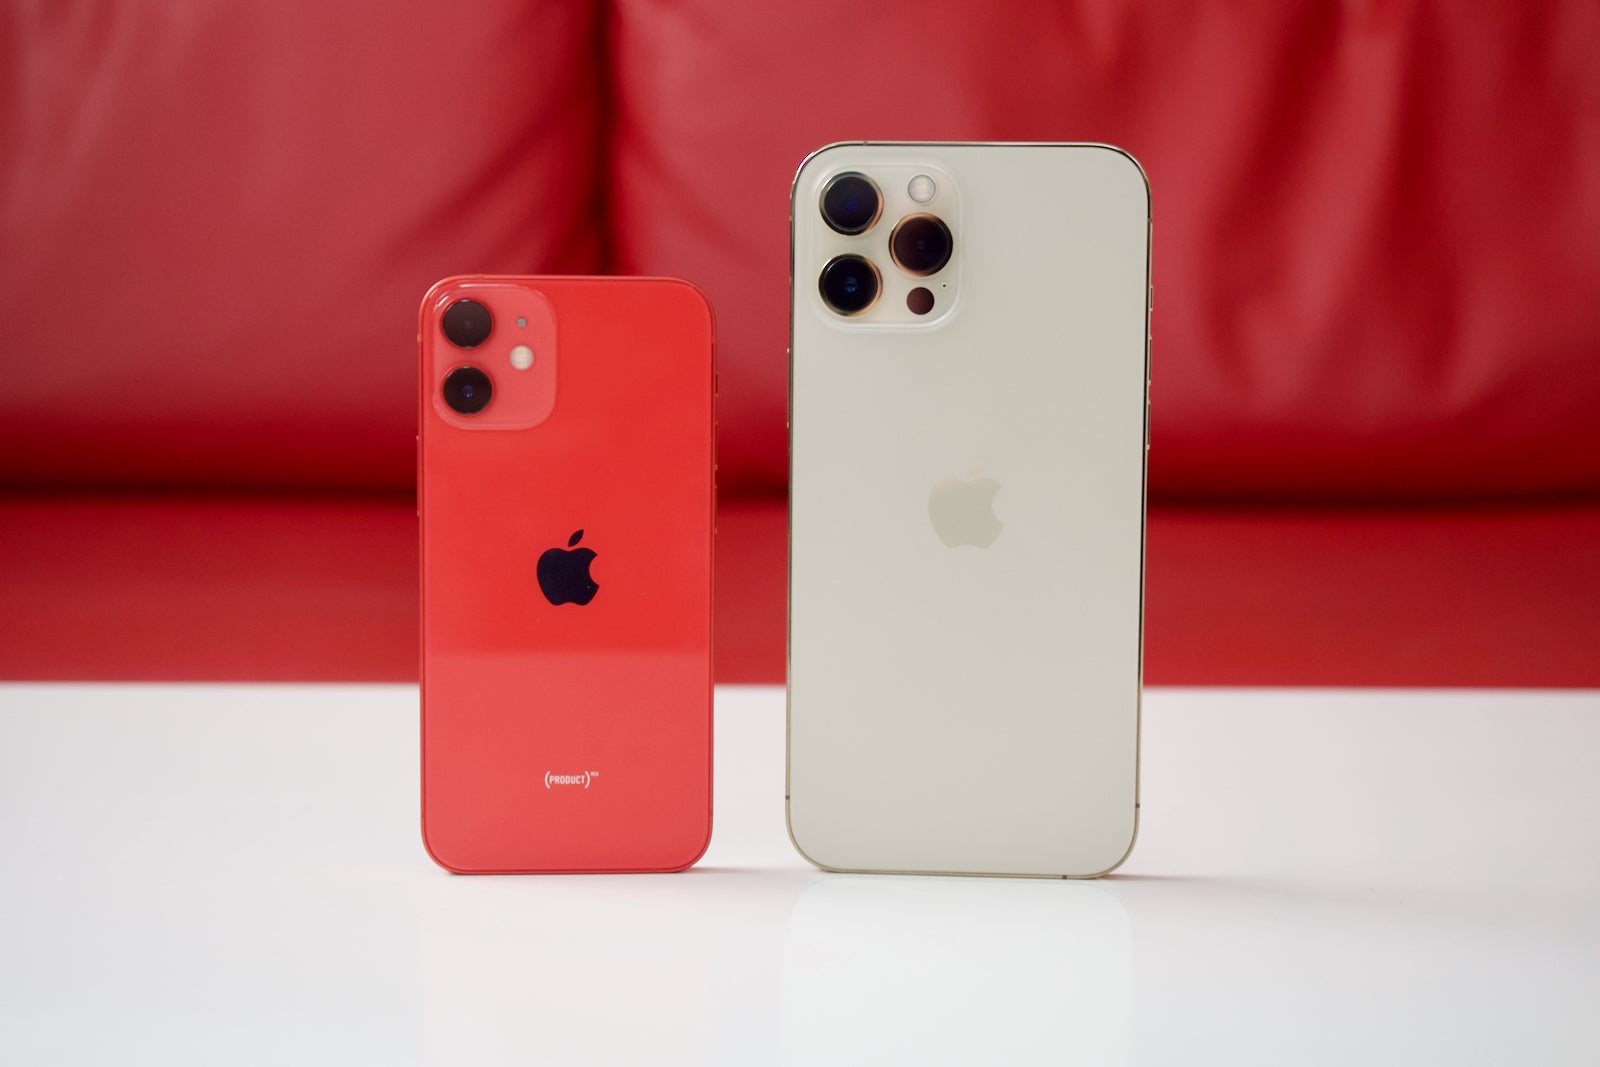 Left - iPhone 12 mini; Right - iPhone 12 Pro Max - Prediction: the iPhone mini is not dead, it will rise from the ashes